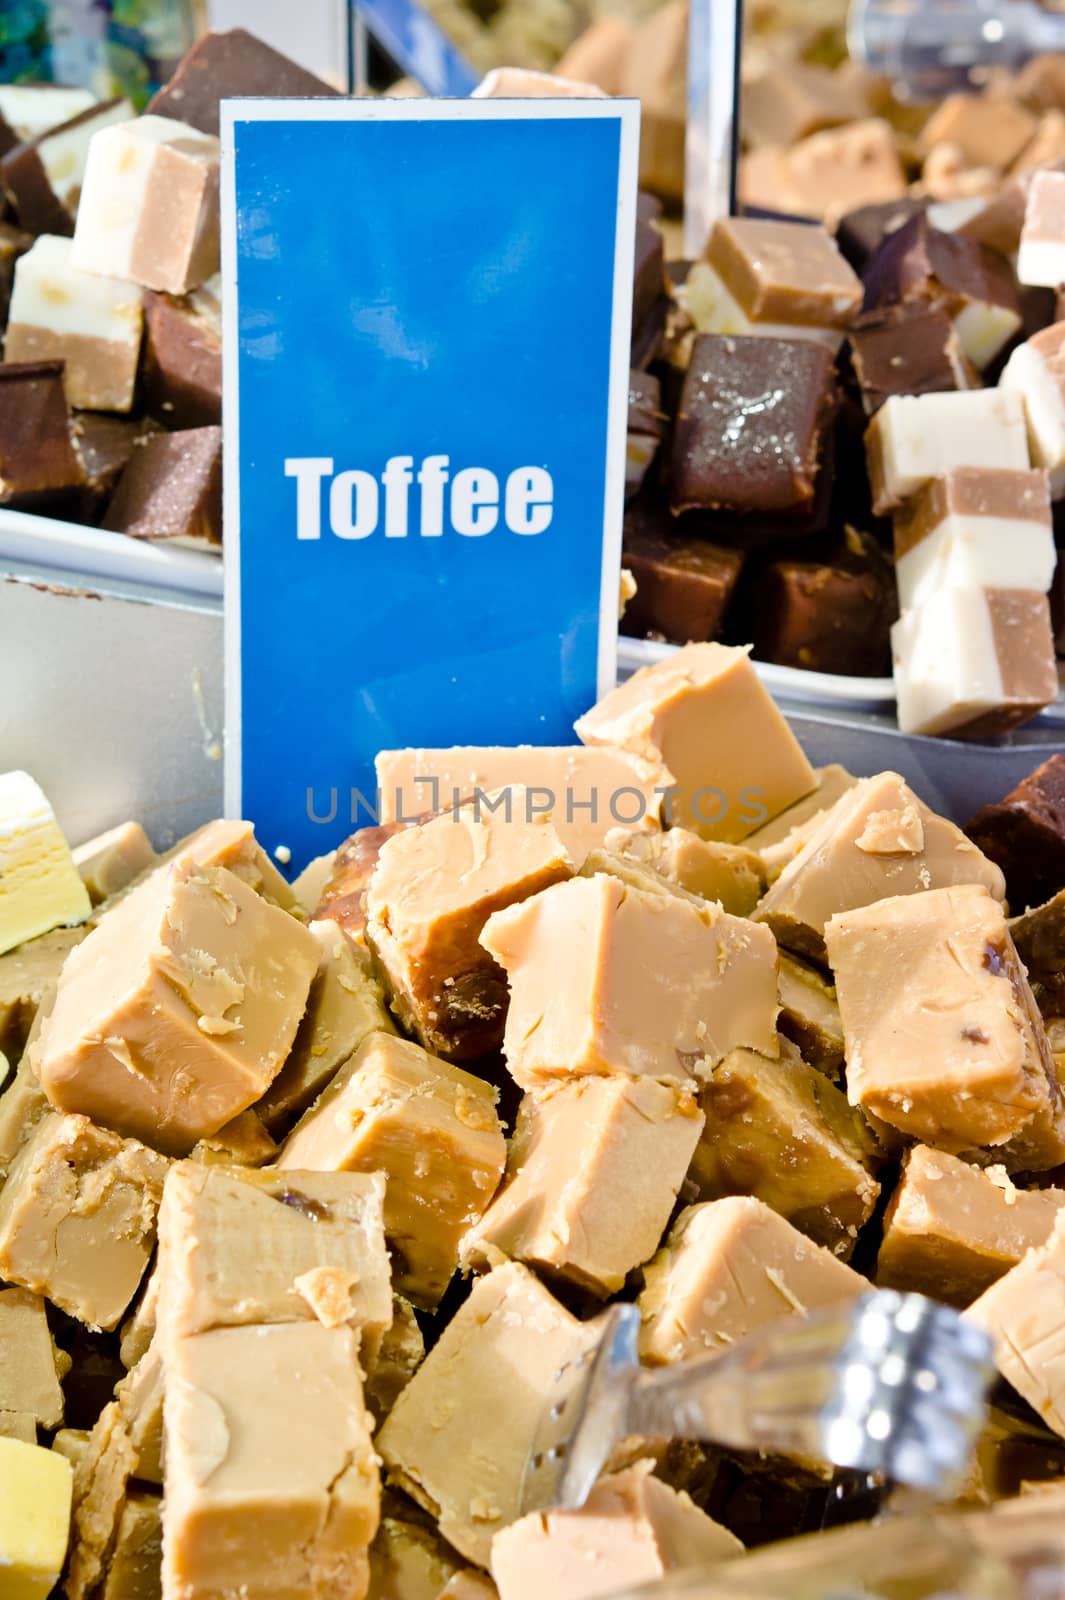 Display of toffee flavored fudge sweets at a market